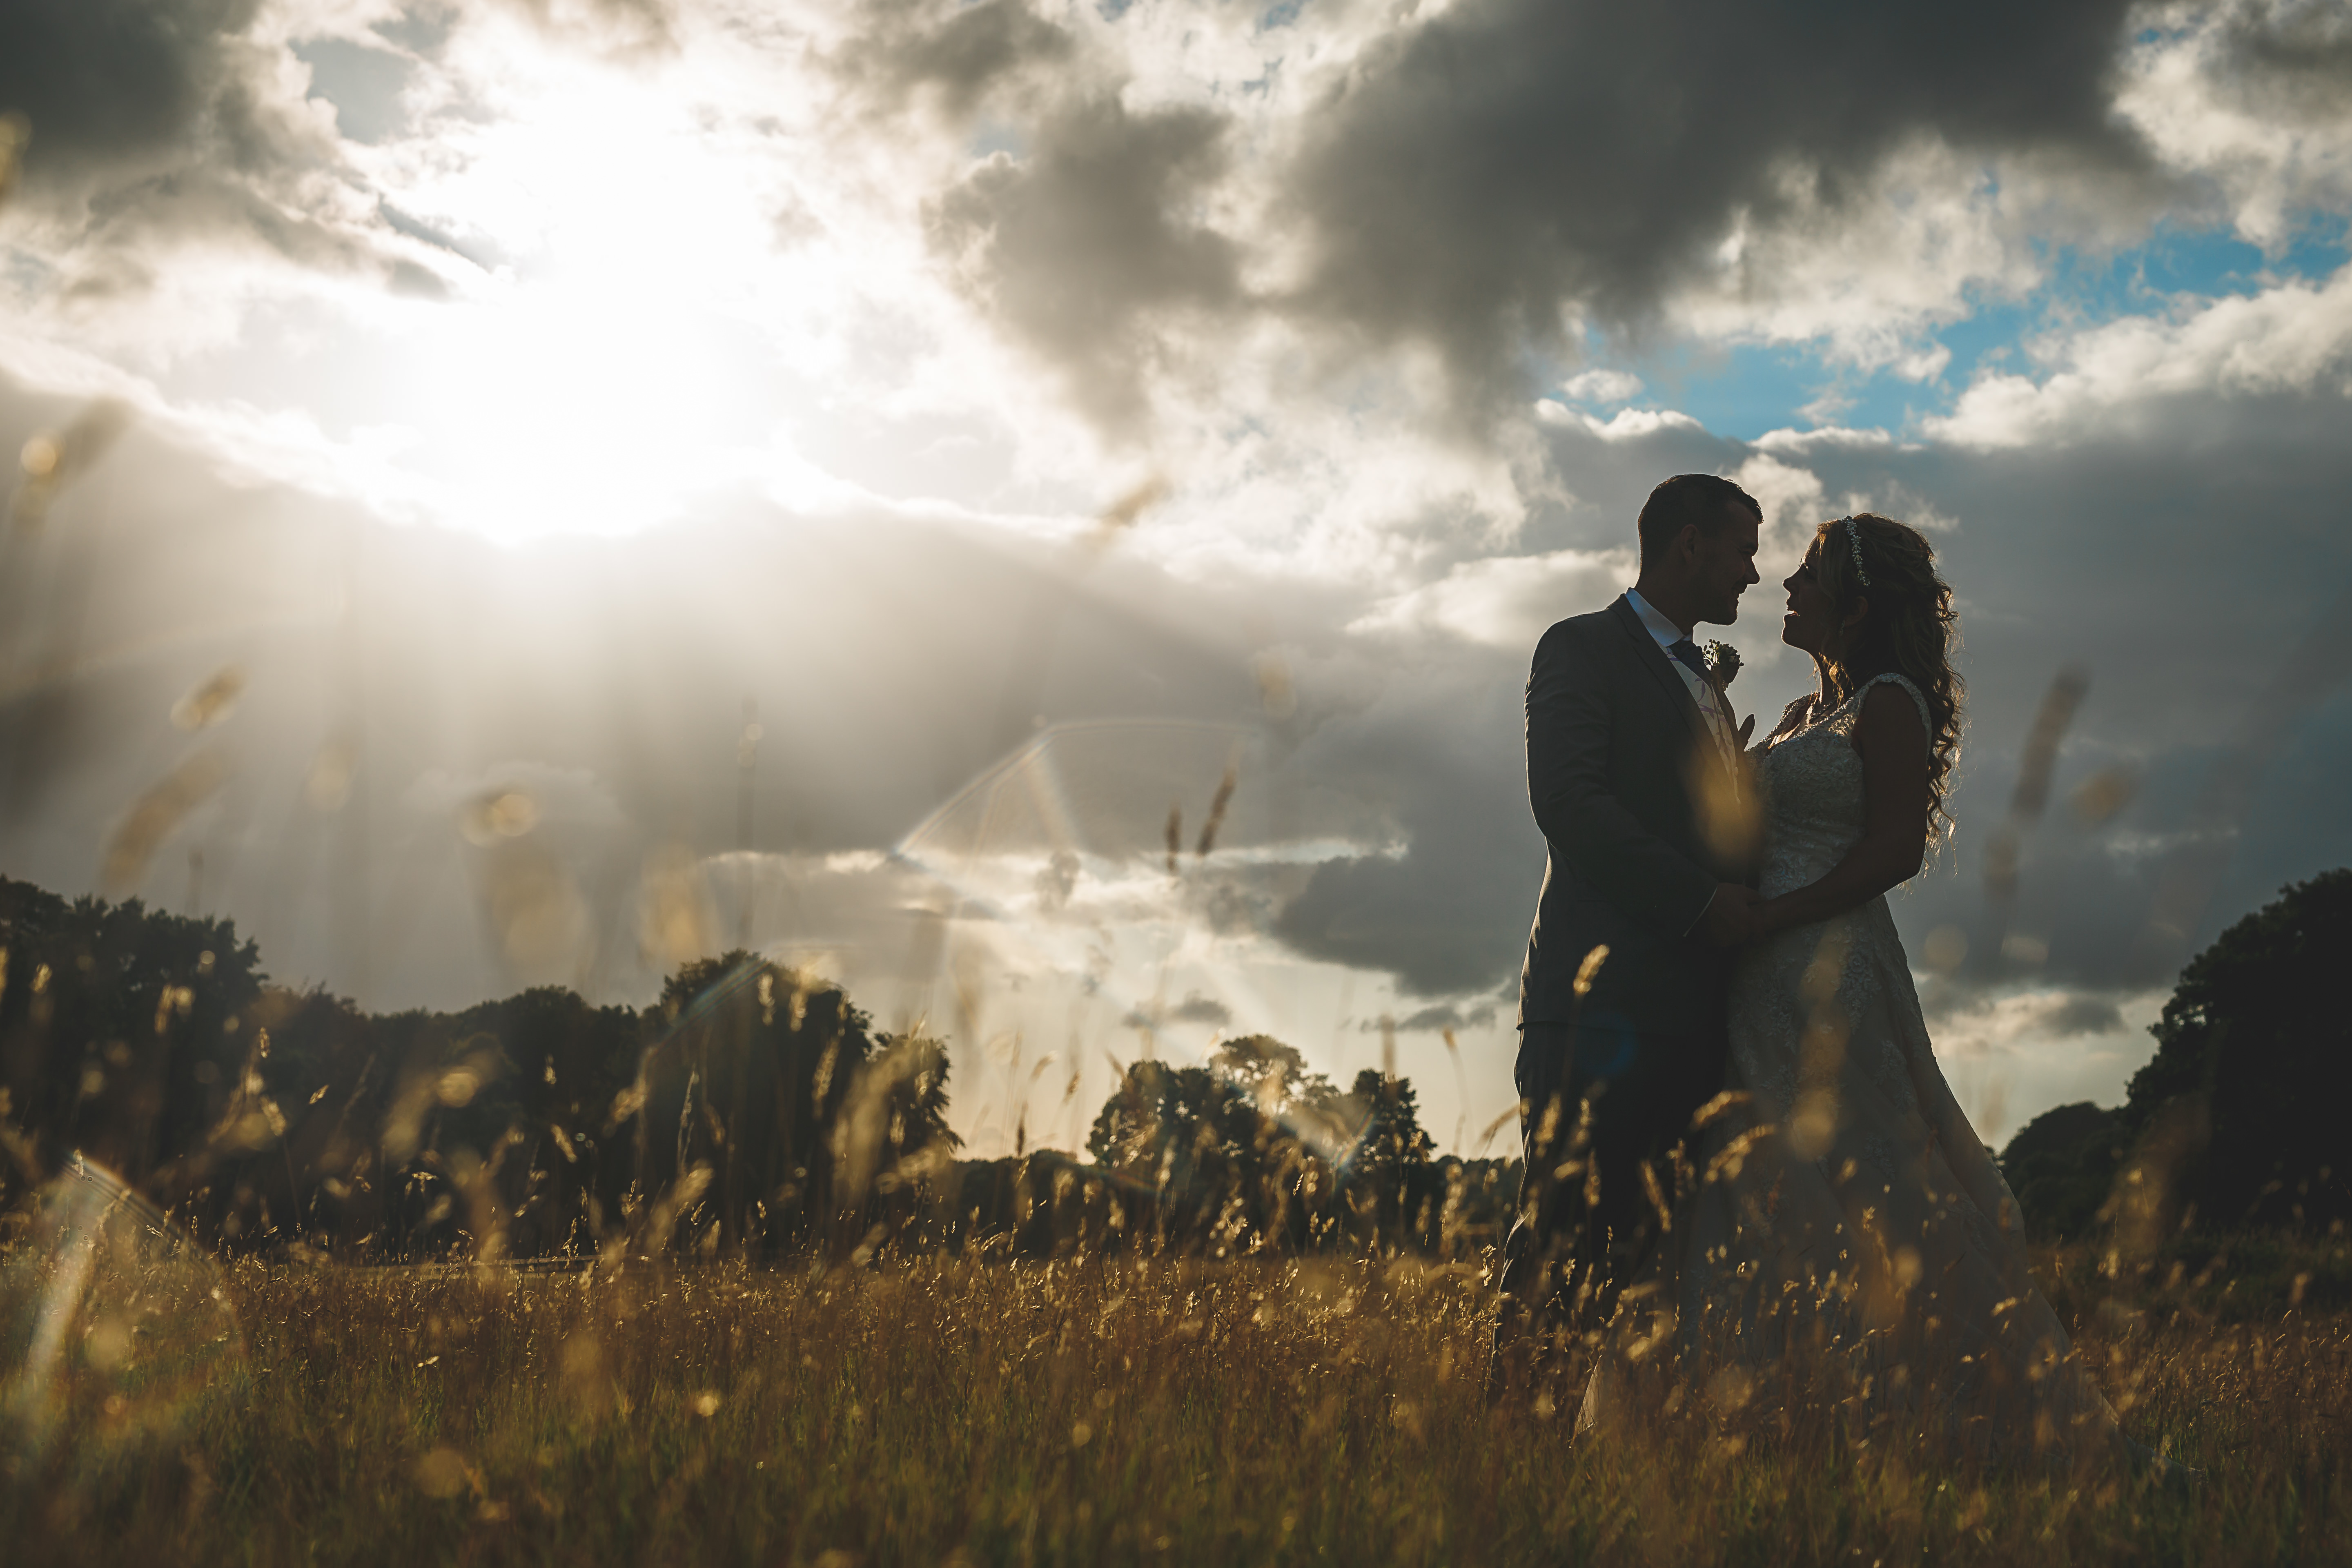 epic sunset picture with bride and groom in a cornfield